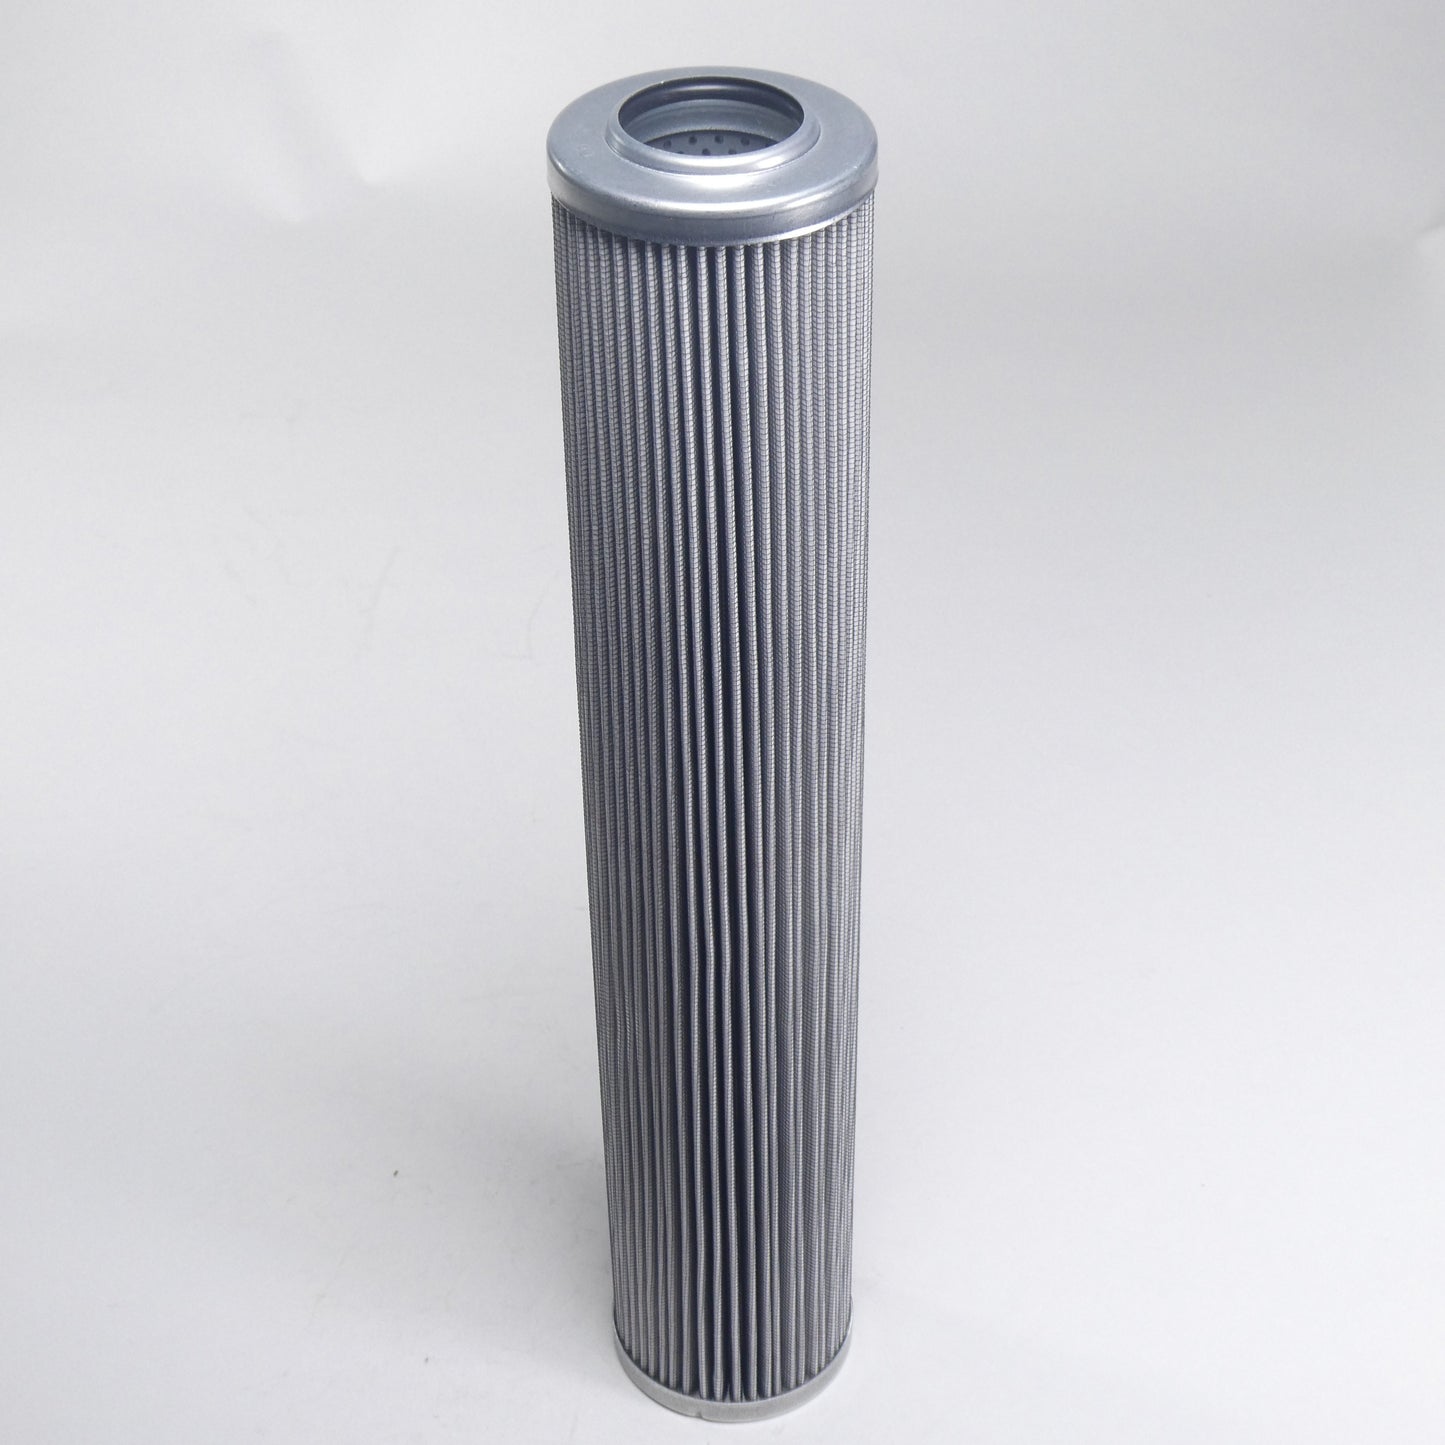 Hydrafil Replacement Filter Element for Hilco 3830-14-016-C